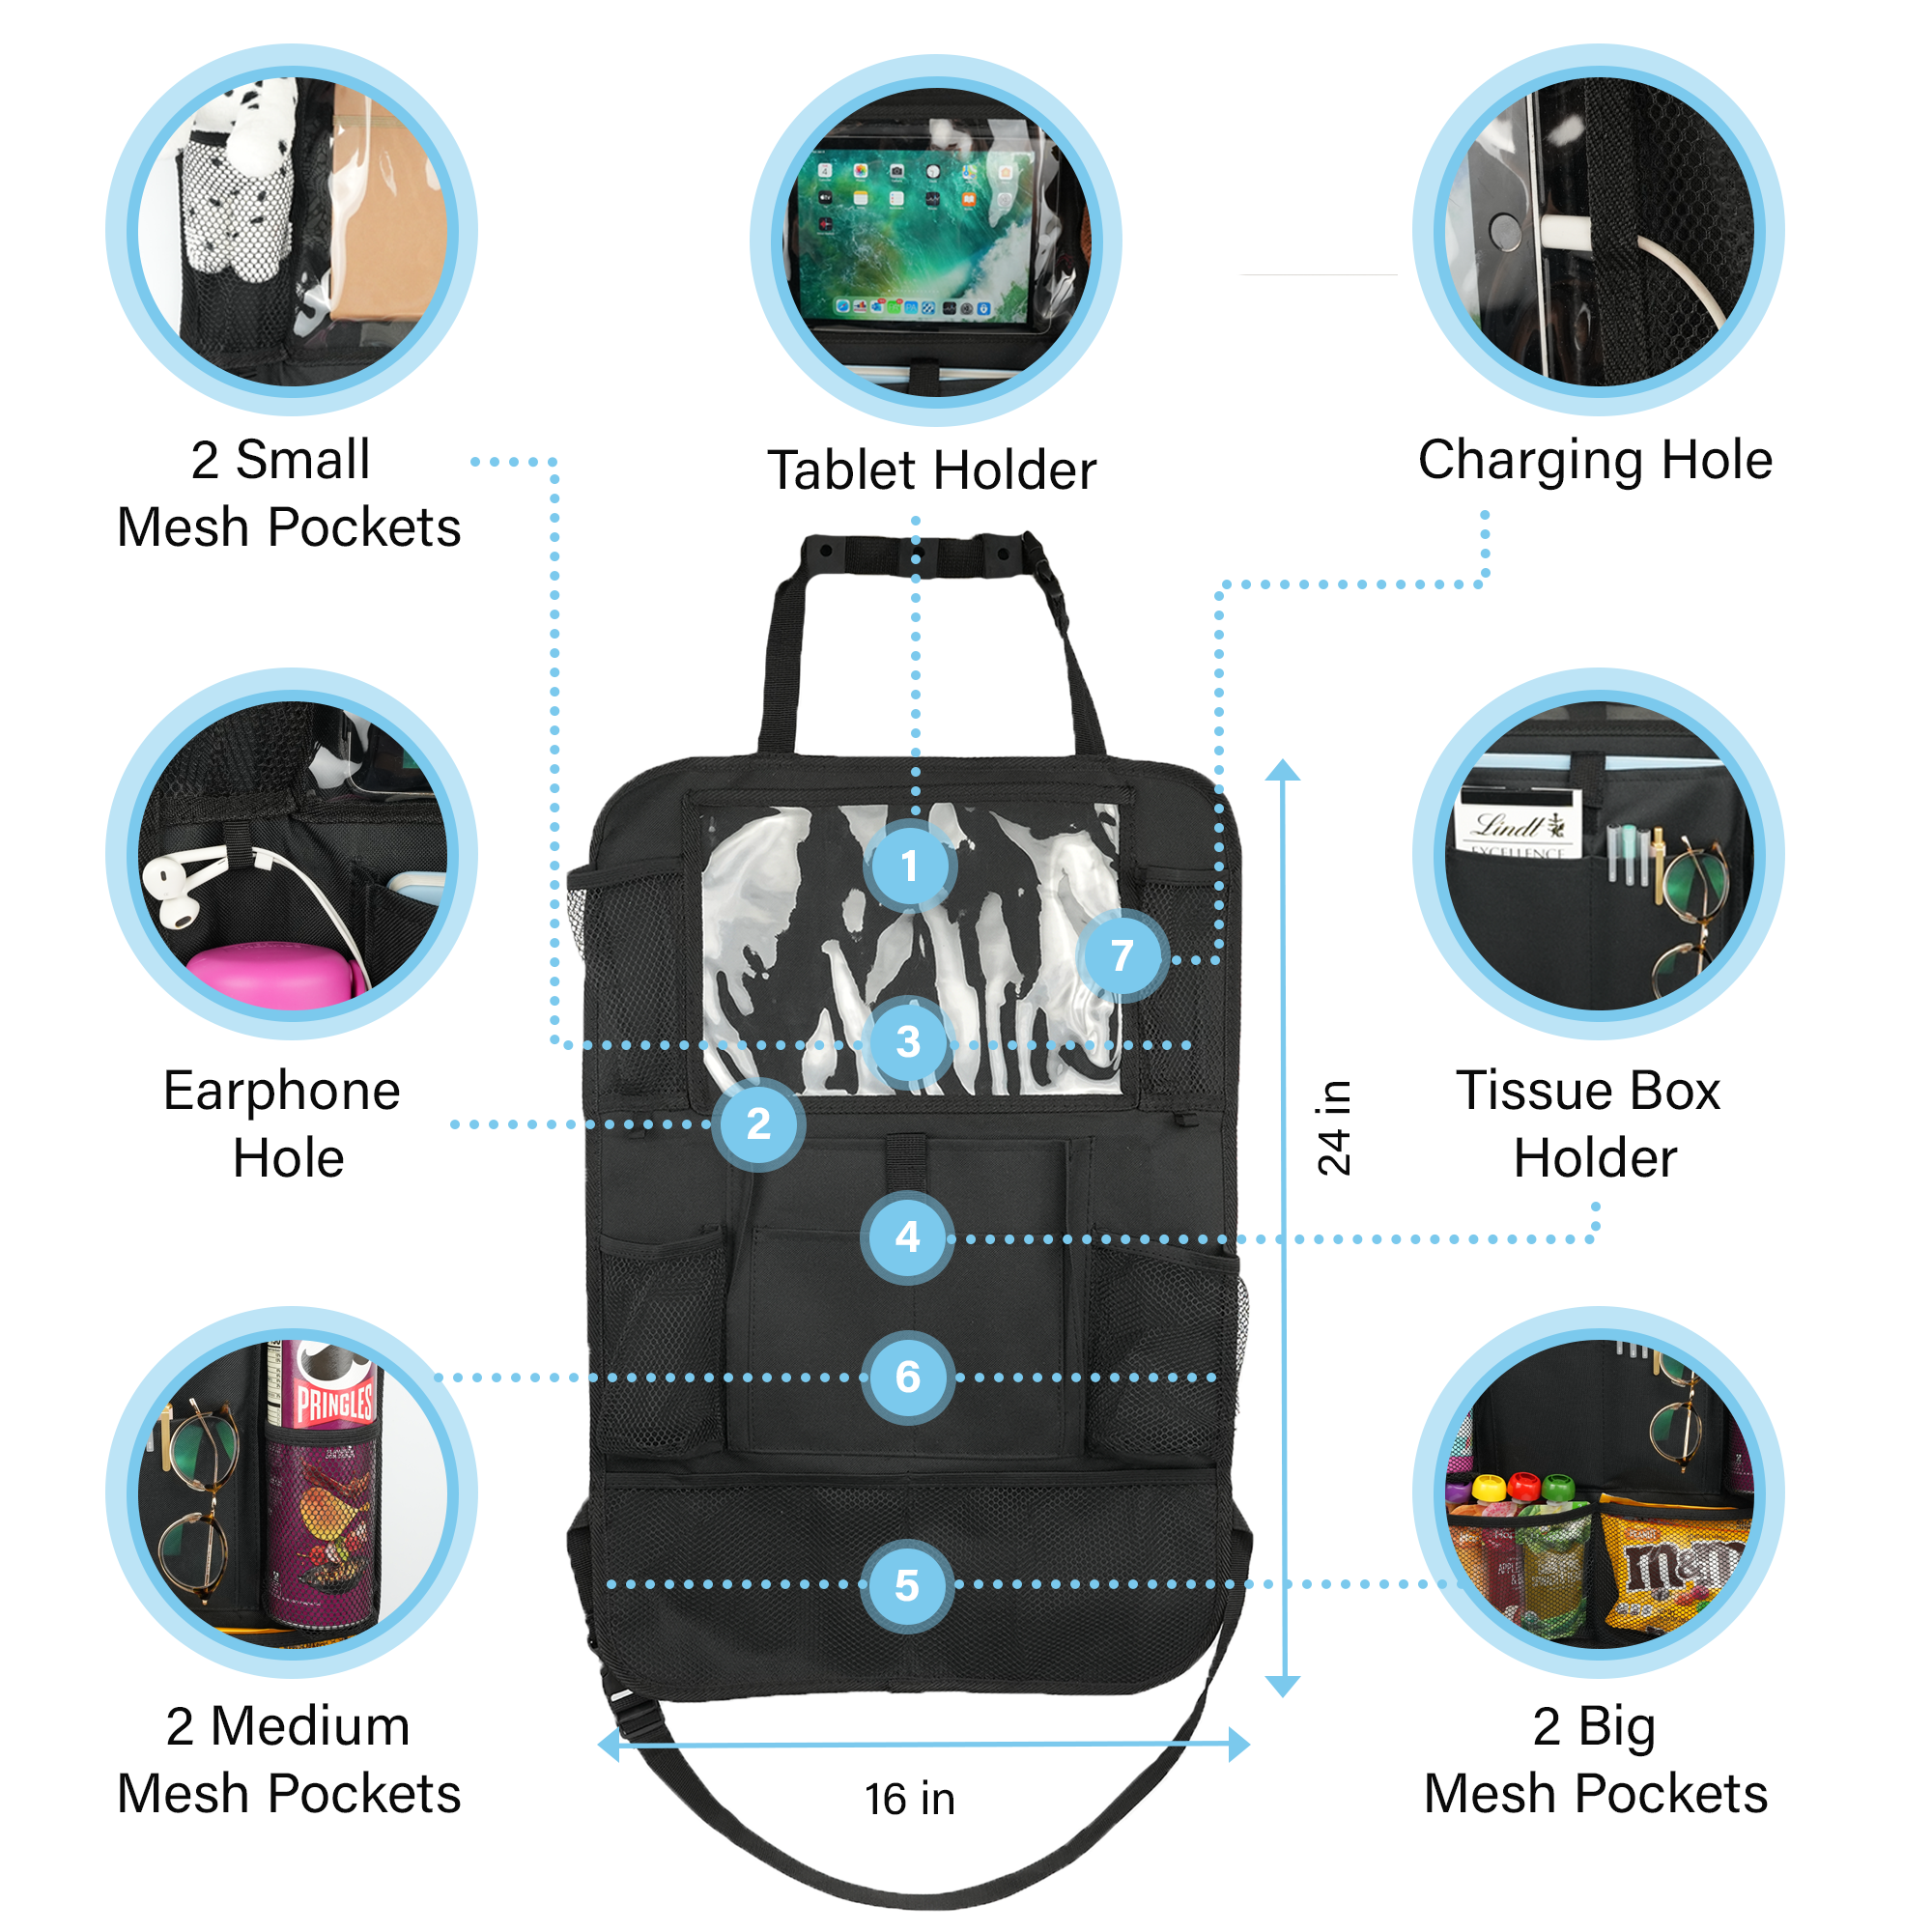 car back seat organizer automotive seat back organizers stuff vehicle seats attachable storage organisers waterproof kick mat car travel accessories multiple pockets storage durable compartments touch screen tablet holder